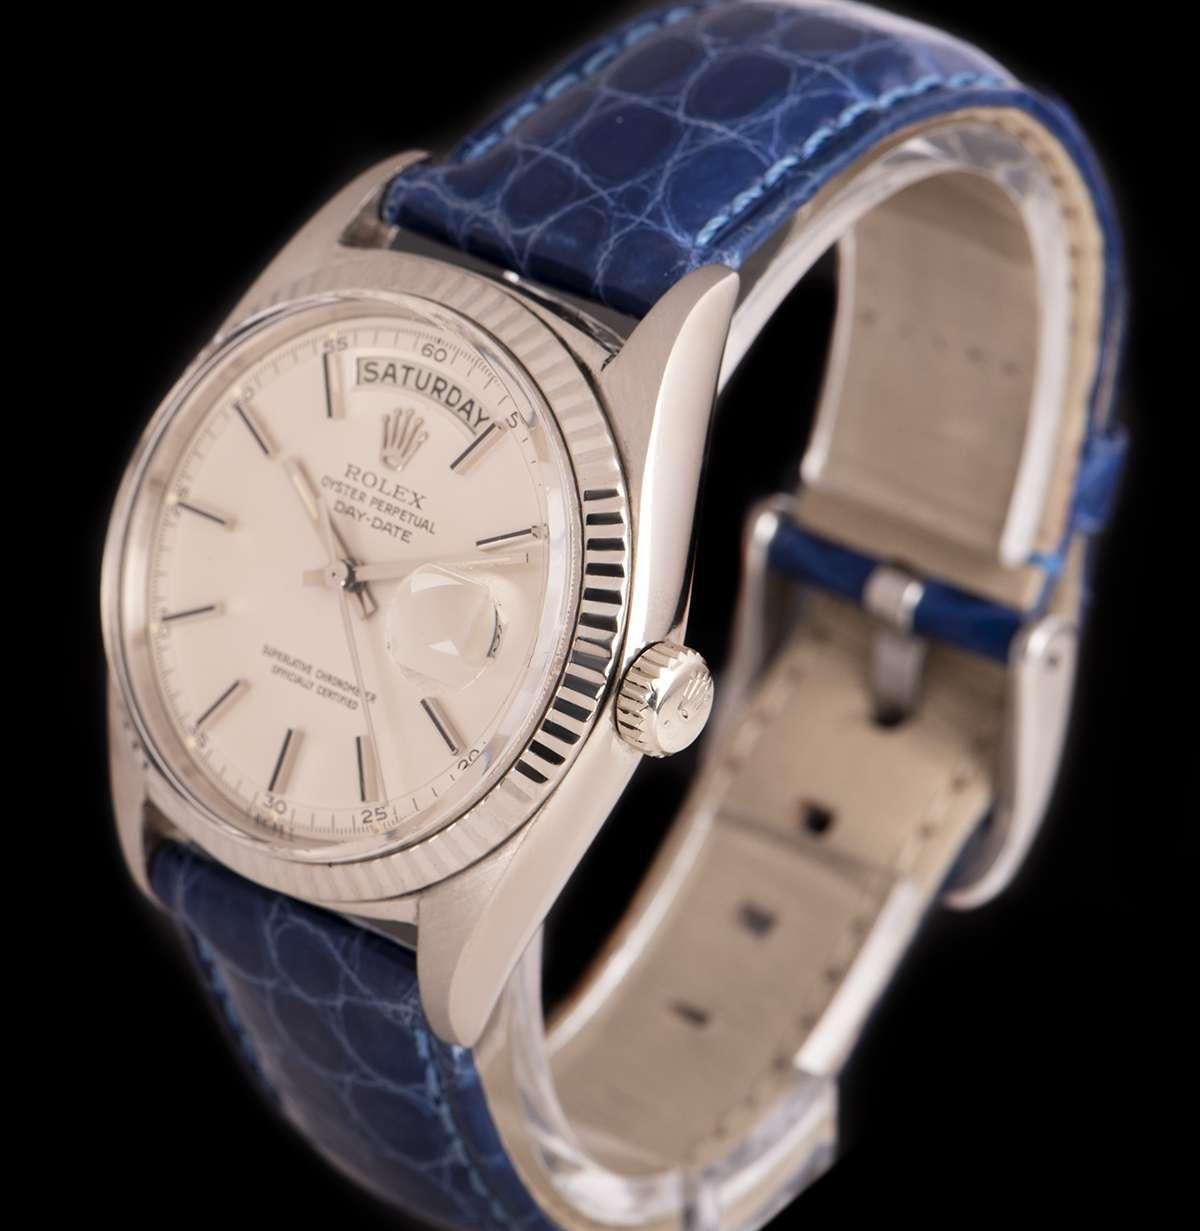 An 18k White Gold Oyster Perpetual Day-Date Vintage Gents Wristwatch from 1964, silver dial with applied hour markers, day aperture at 12 0'clock, date aperture at 3 0'clock, a fixed 18k white gold fluted bezel, a blue leather strap with a stainless